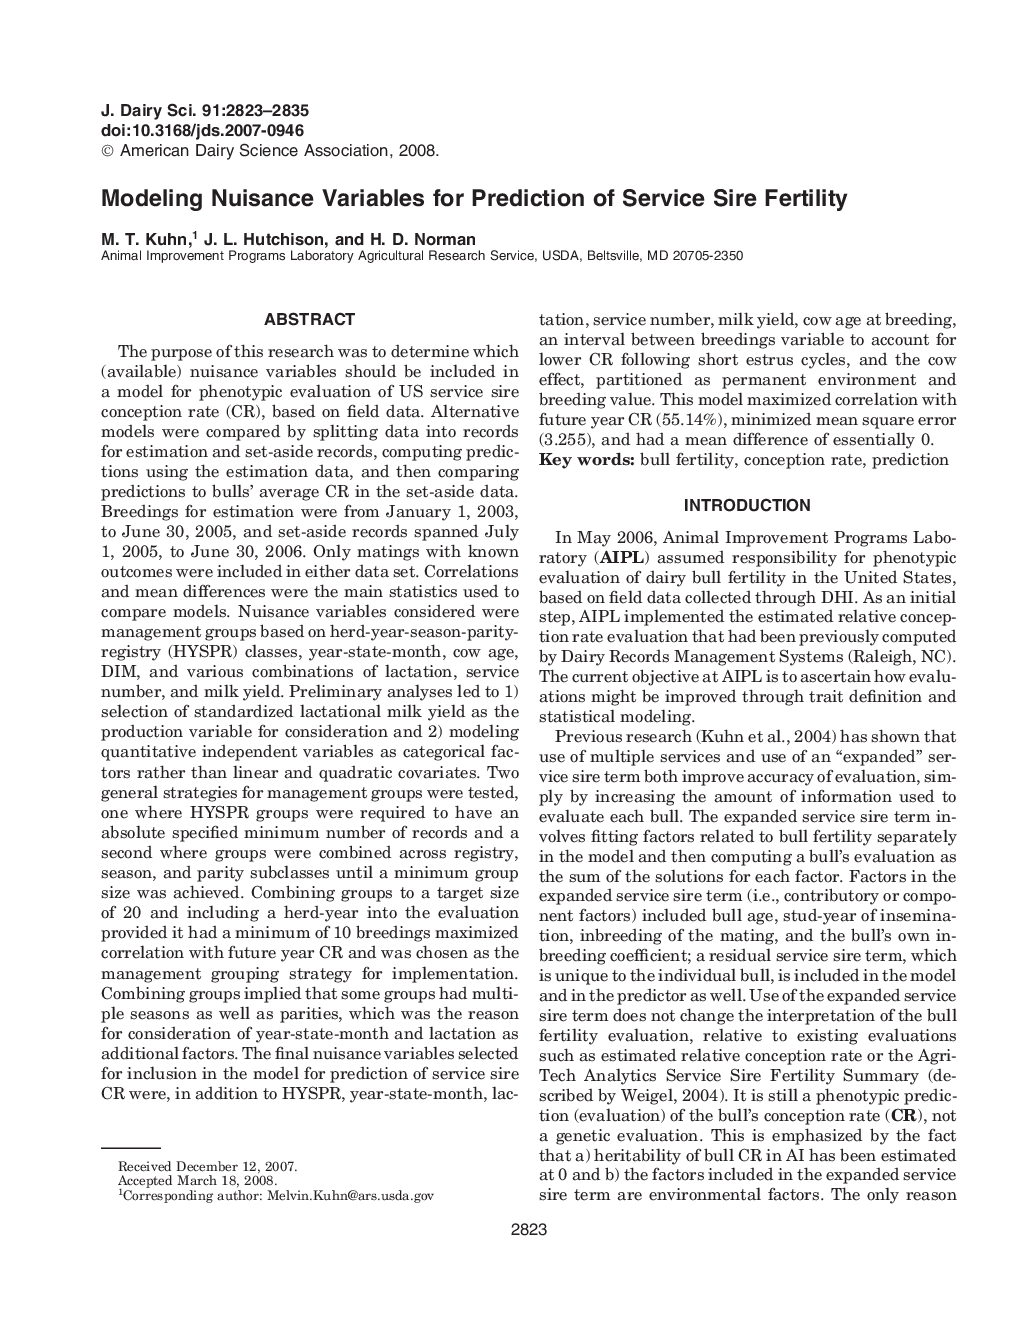 Modeling Nuisance Variables for Prediction of Service Sire Fertility